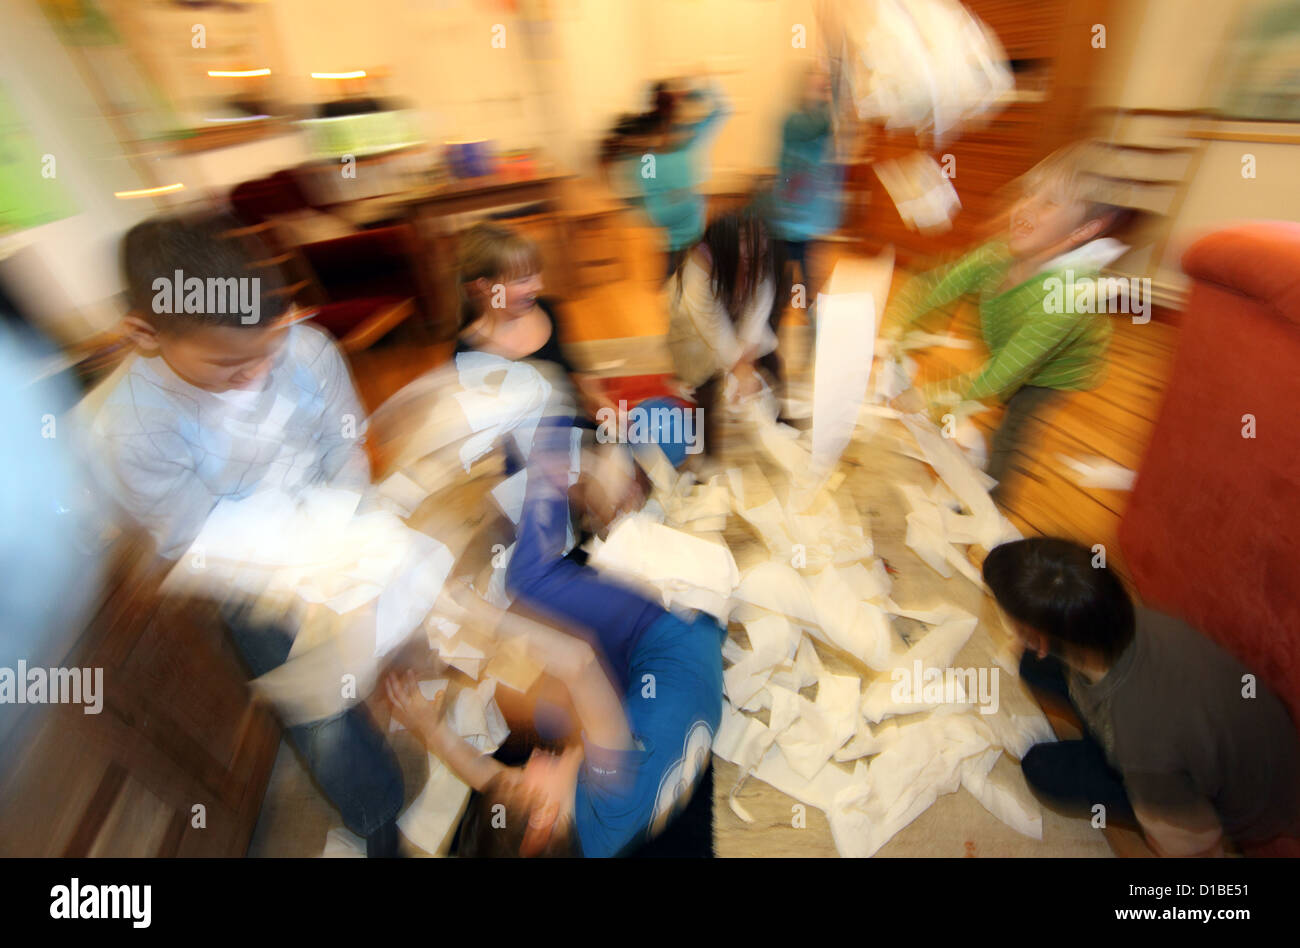 Berlin, Germany, kids throwing paper in the air Stock Photo